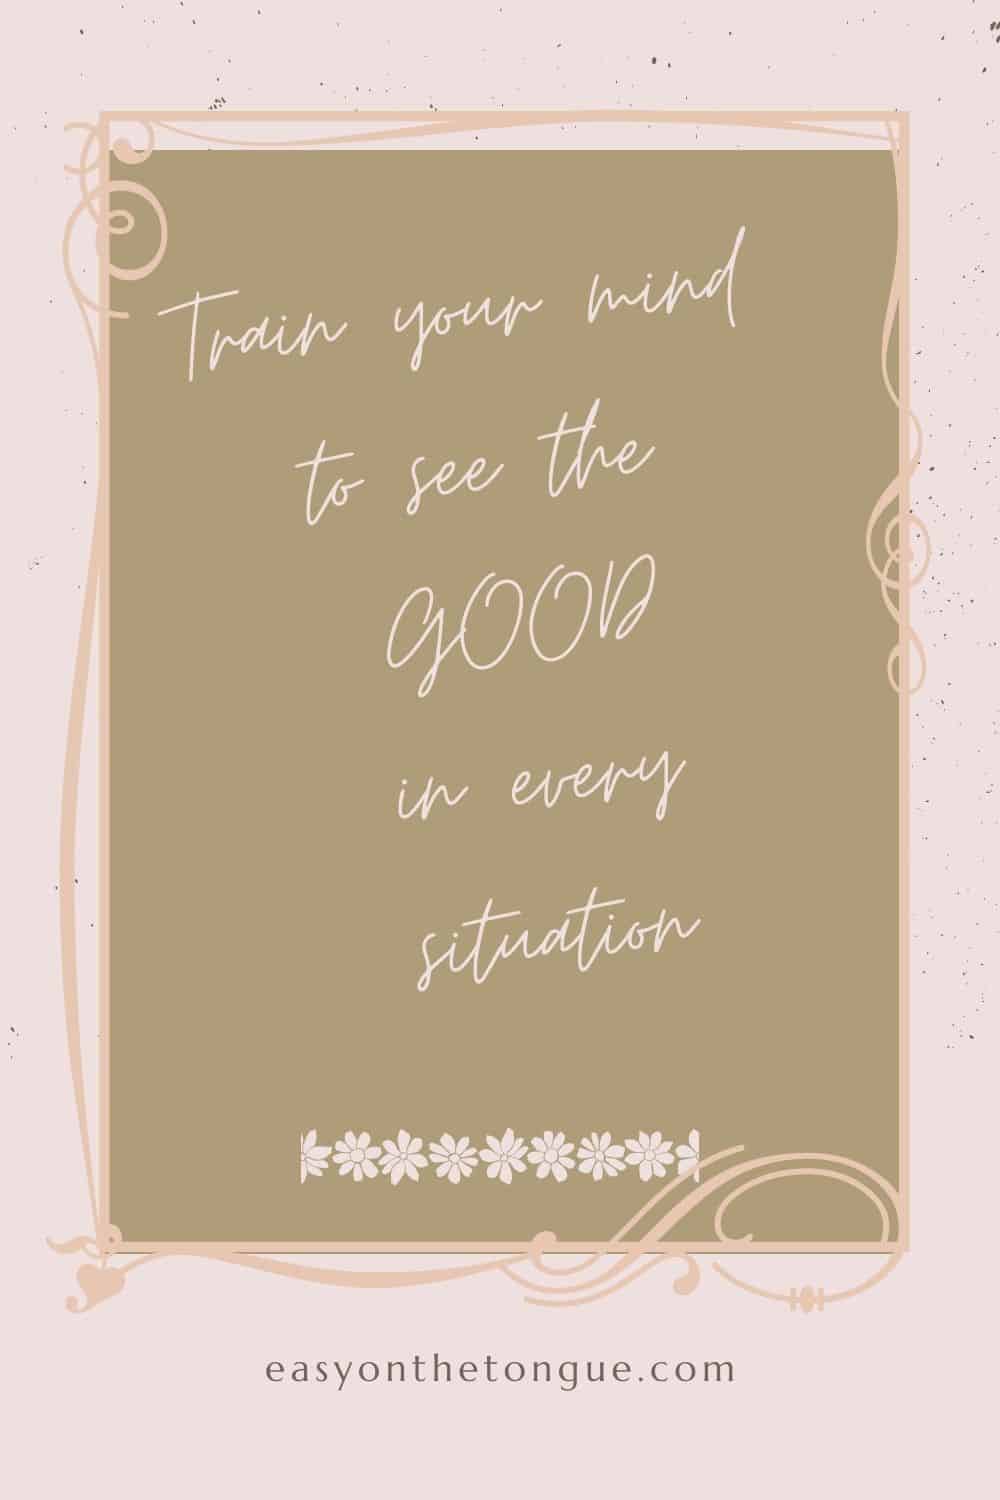 Train your mind to see the GOOD in every situation Inspirational Quotes to Live by